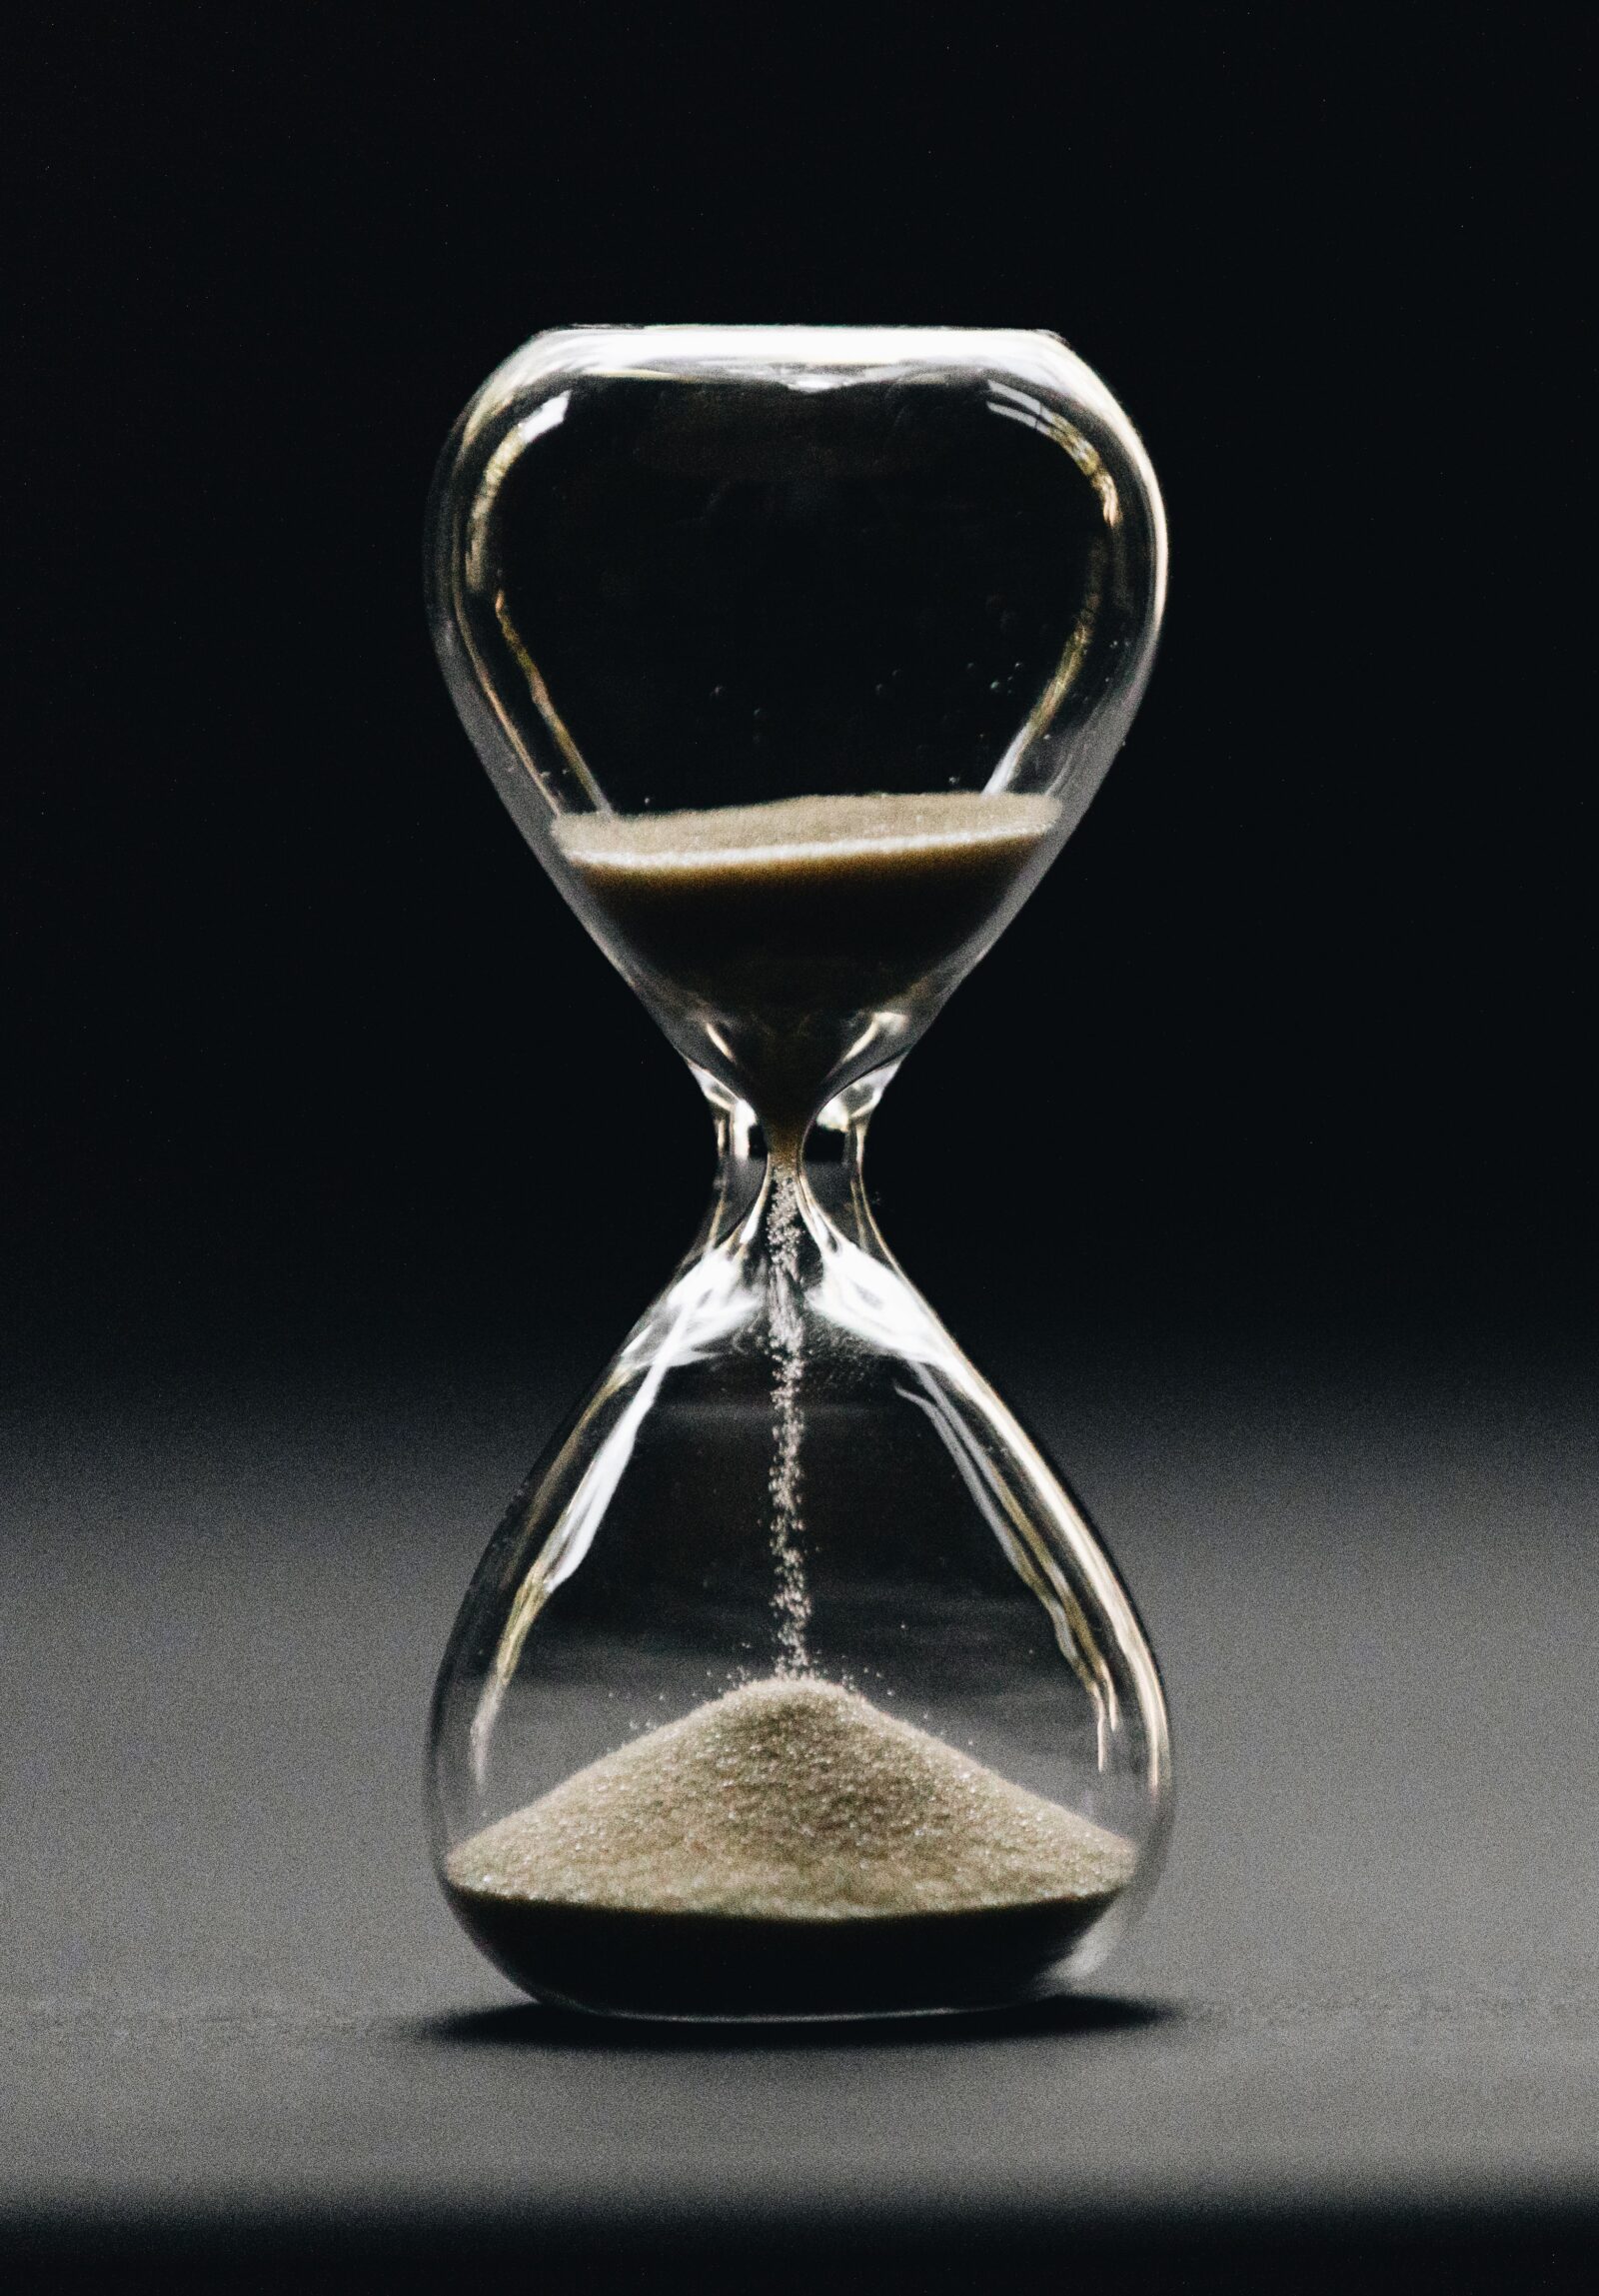 Time is ticking - hourglass